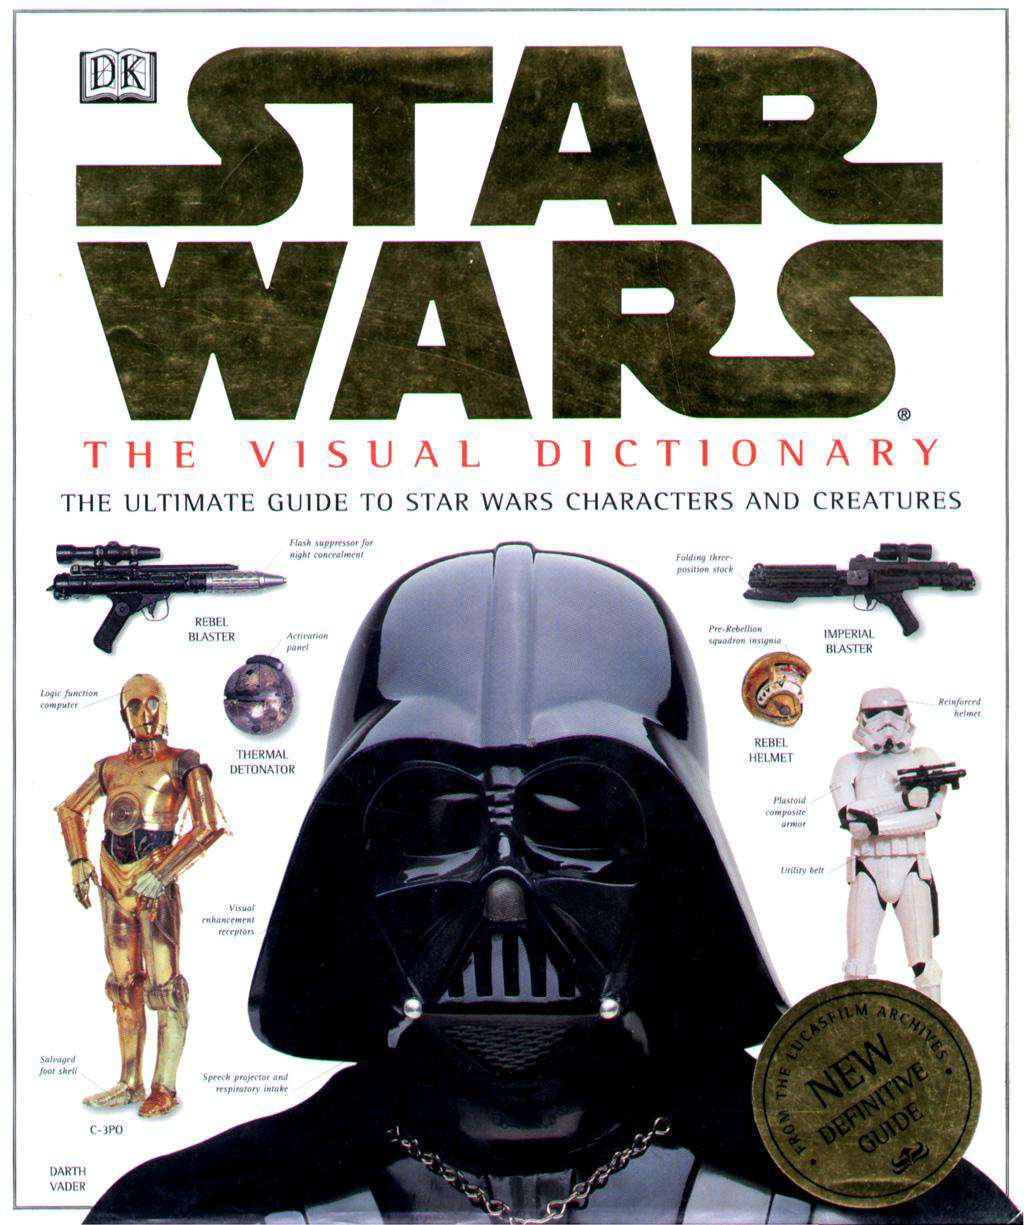 The Visual Dictionary of Star Wars